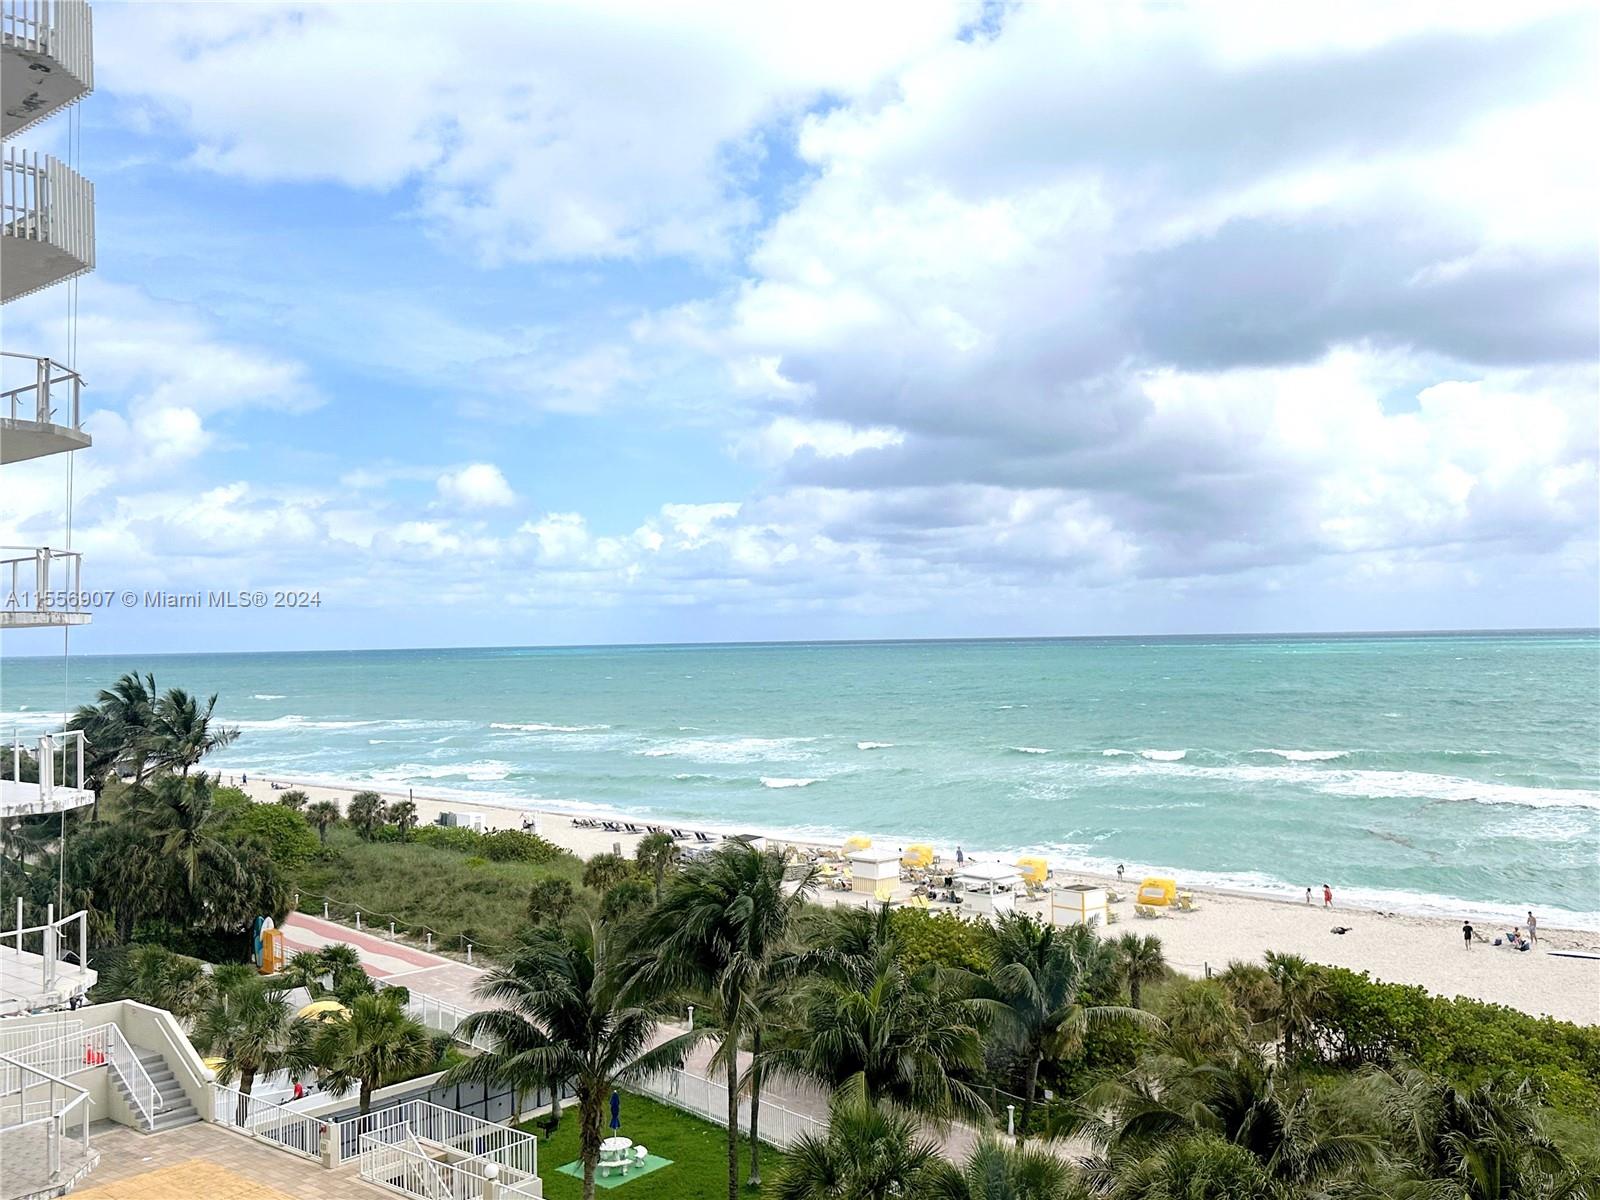 6039 Collins Ave 701, Miami Beach, Florida 33140, 2 Bedrooms Bedrooms, ,2 BathroomsBathrooms,Residentiallease,For Rent,6039 Collins Ave 701,A11556907